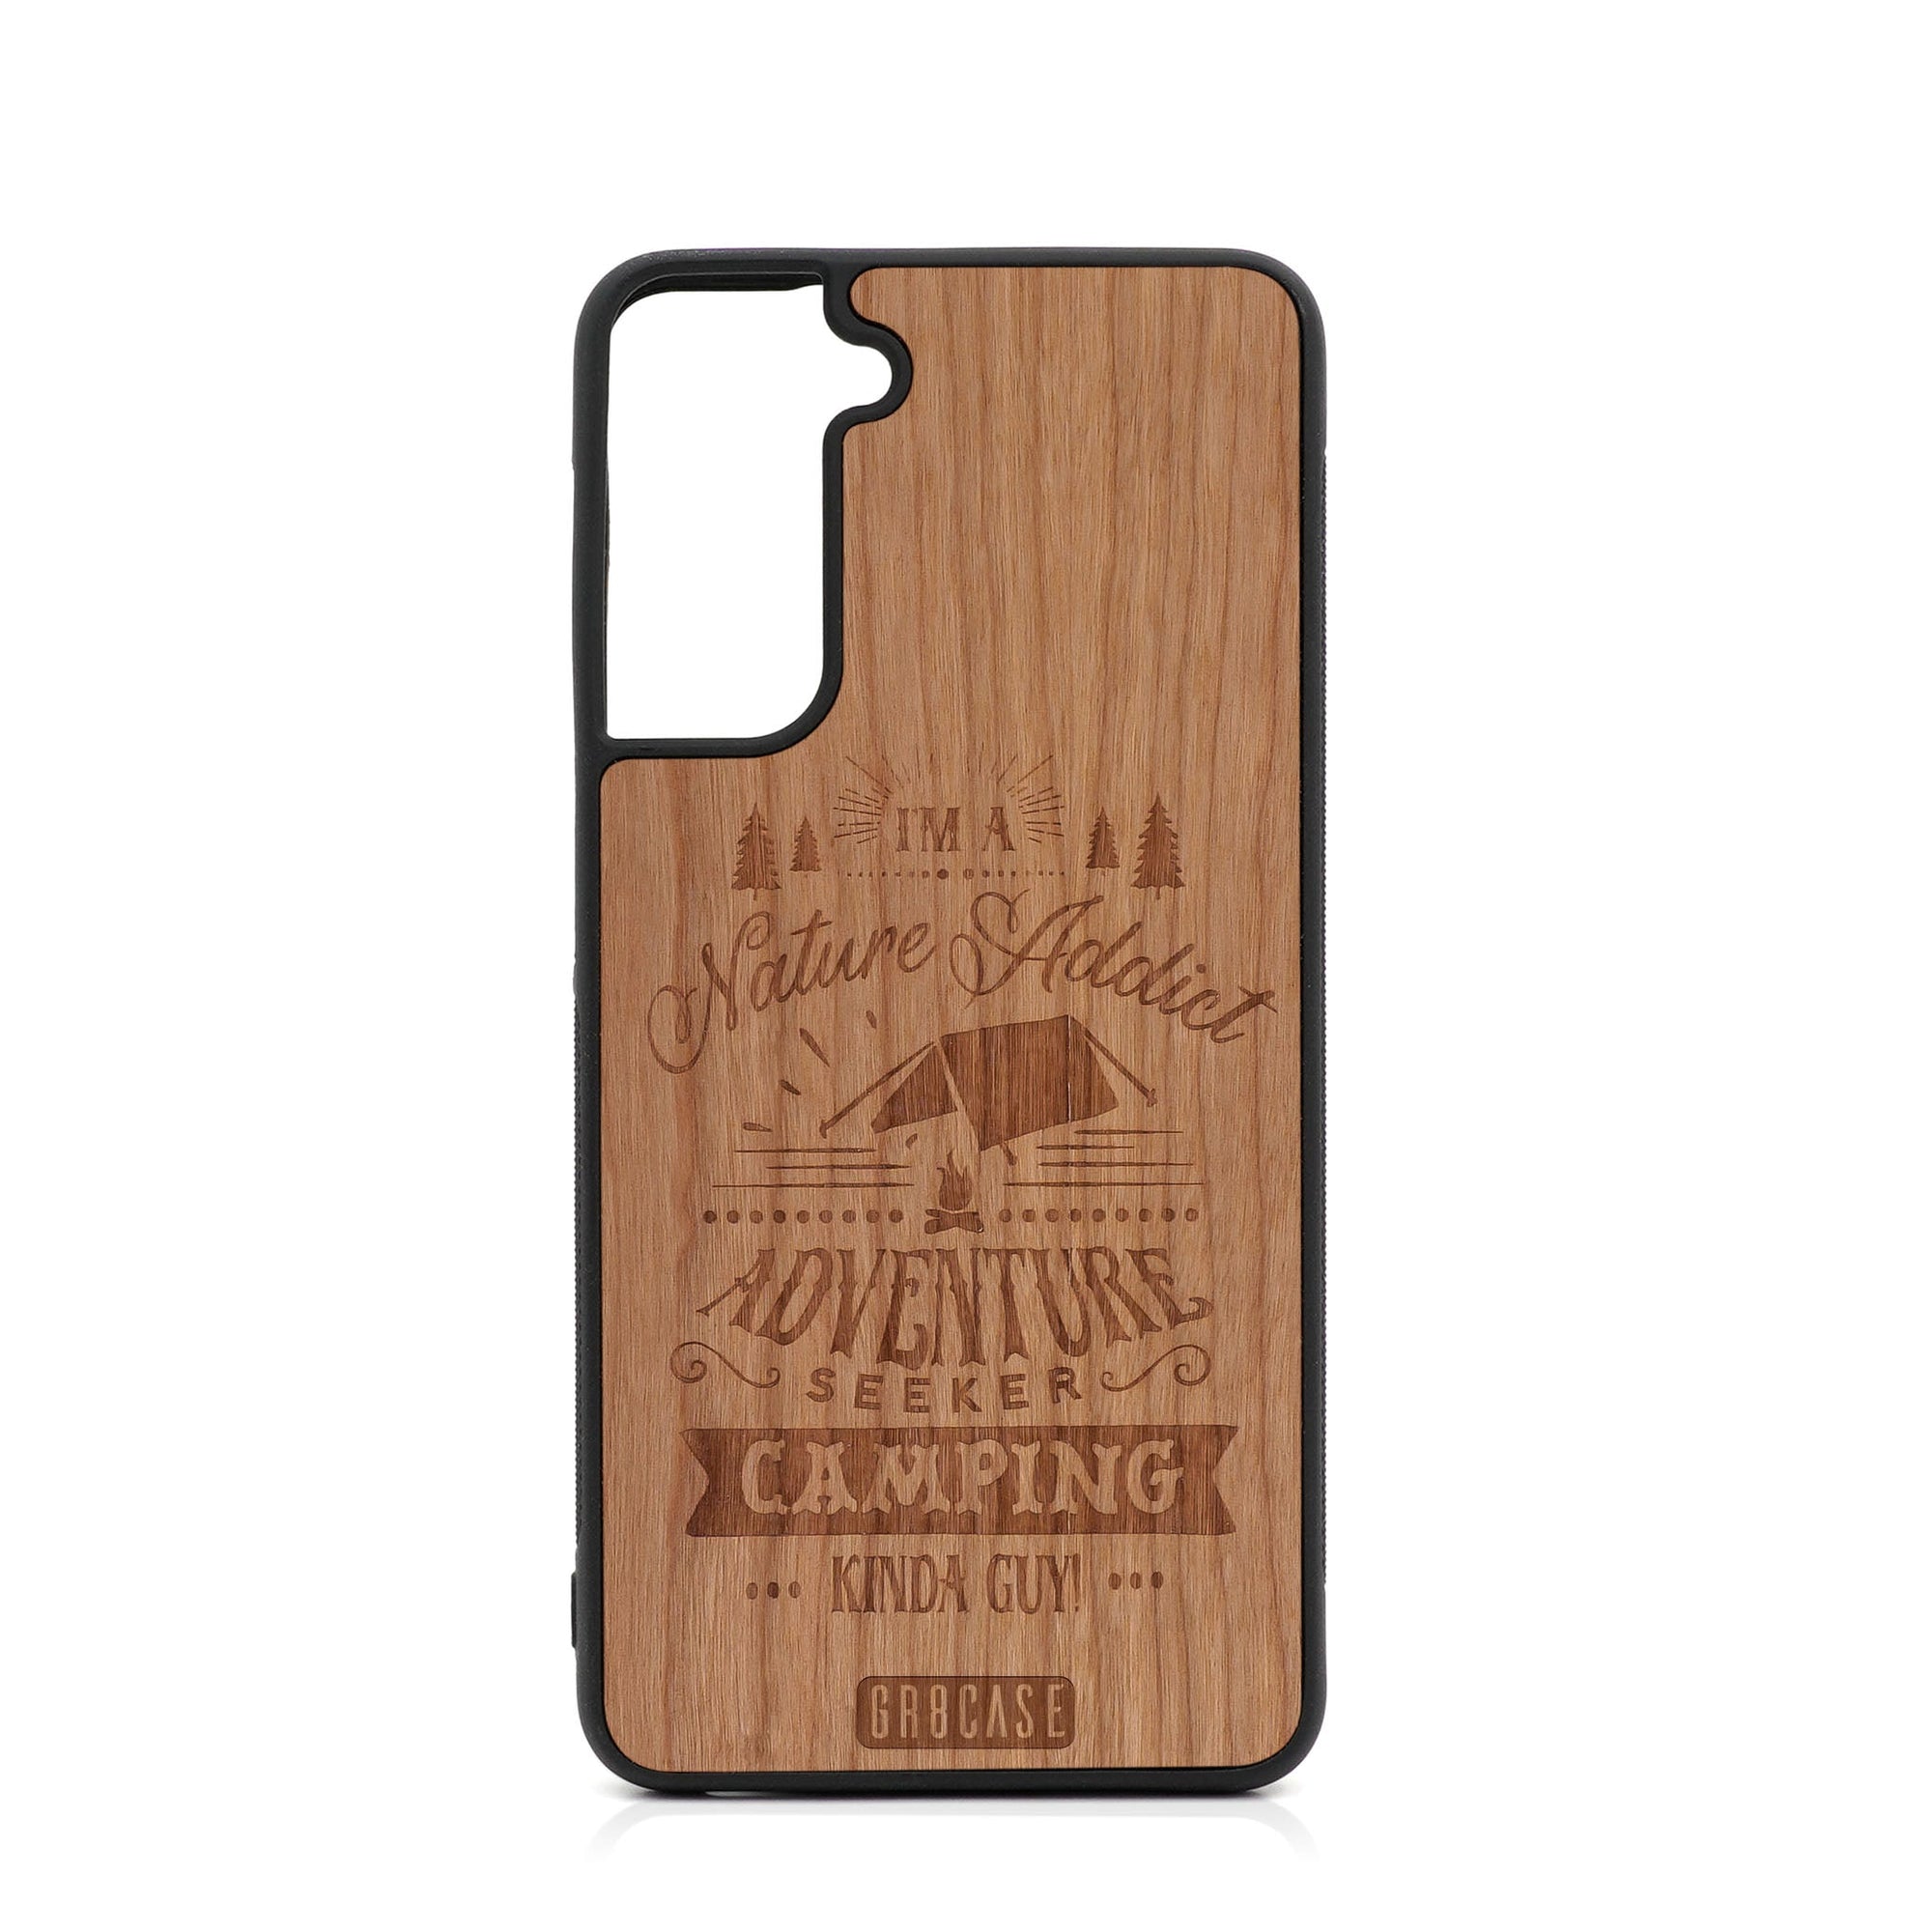 I'm A Nature Addict Adventure Seeker Camping Kinda Guy Design Wood Case For Samsung Galaxy S21 FE 5G